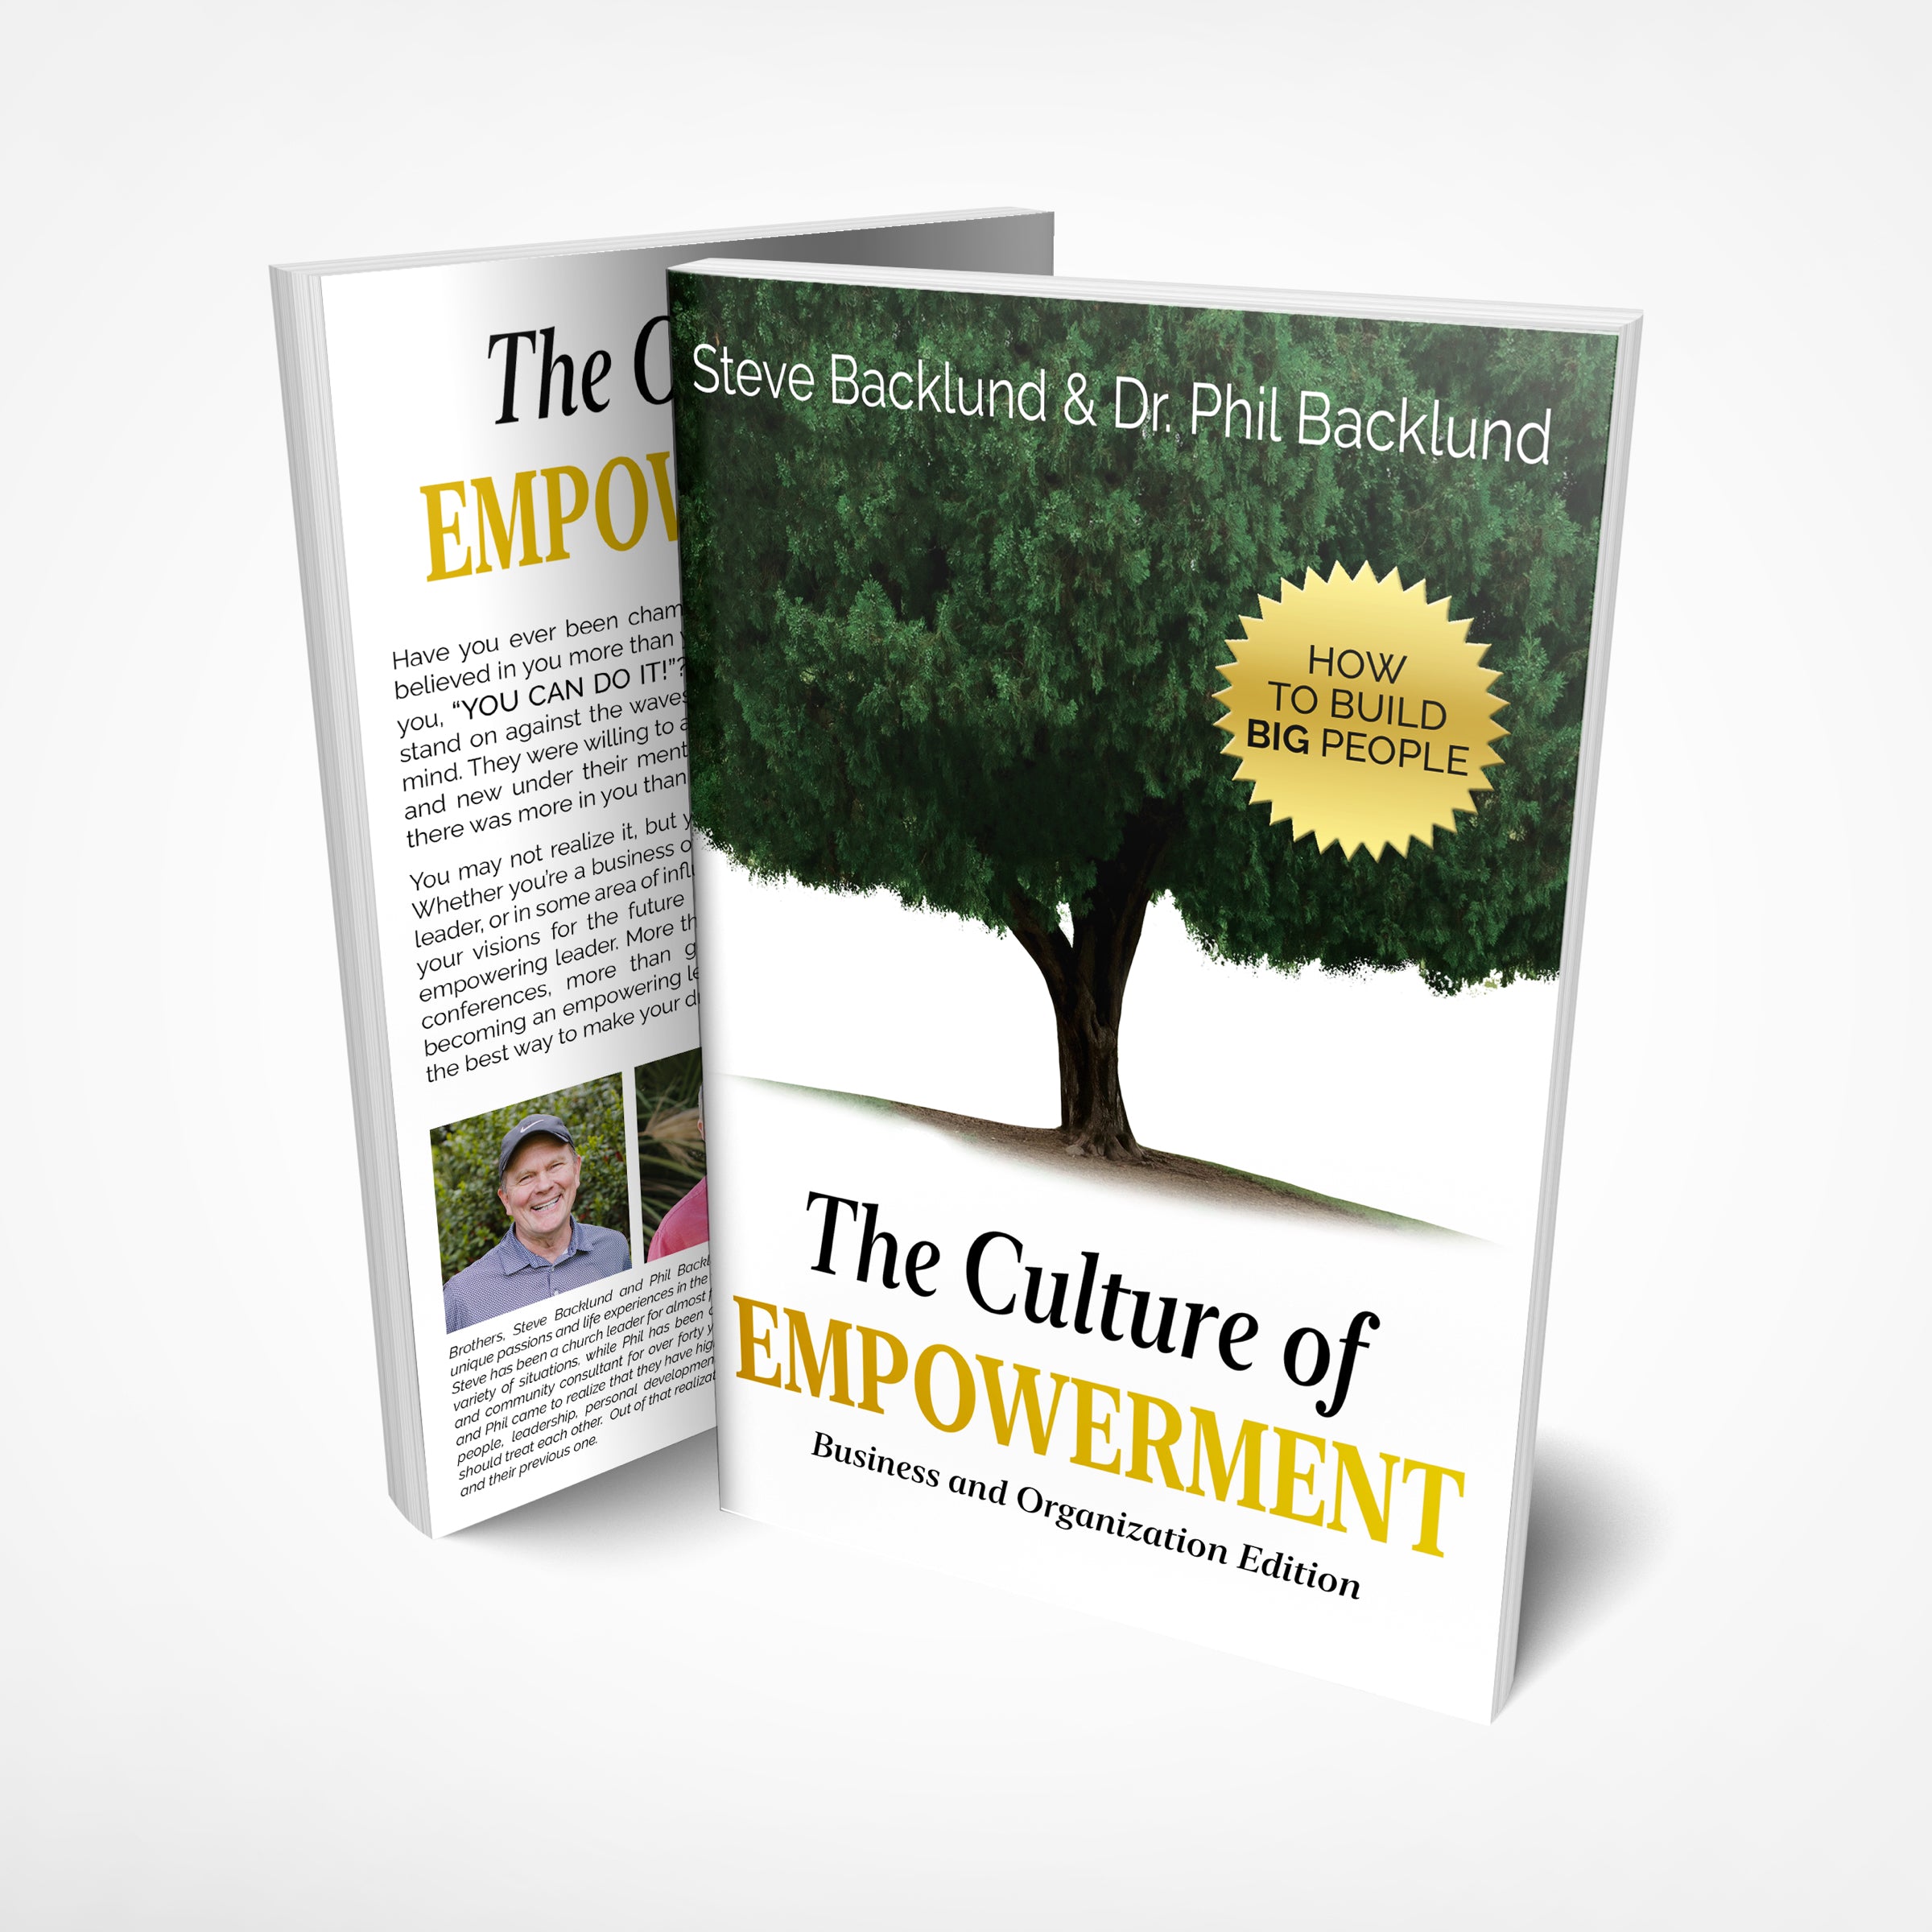 The Culture of Empowerment: Business and Organization Edition